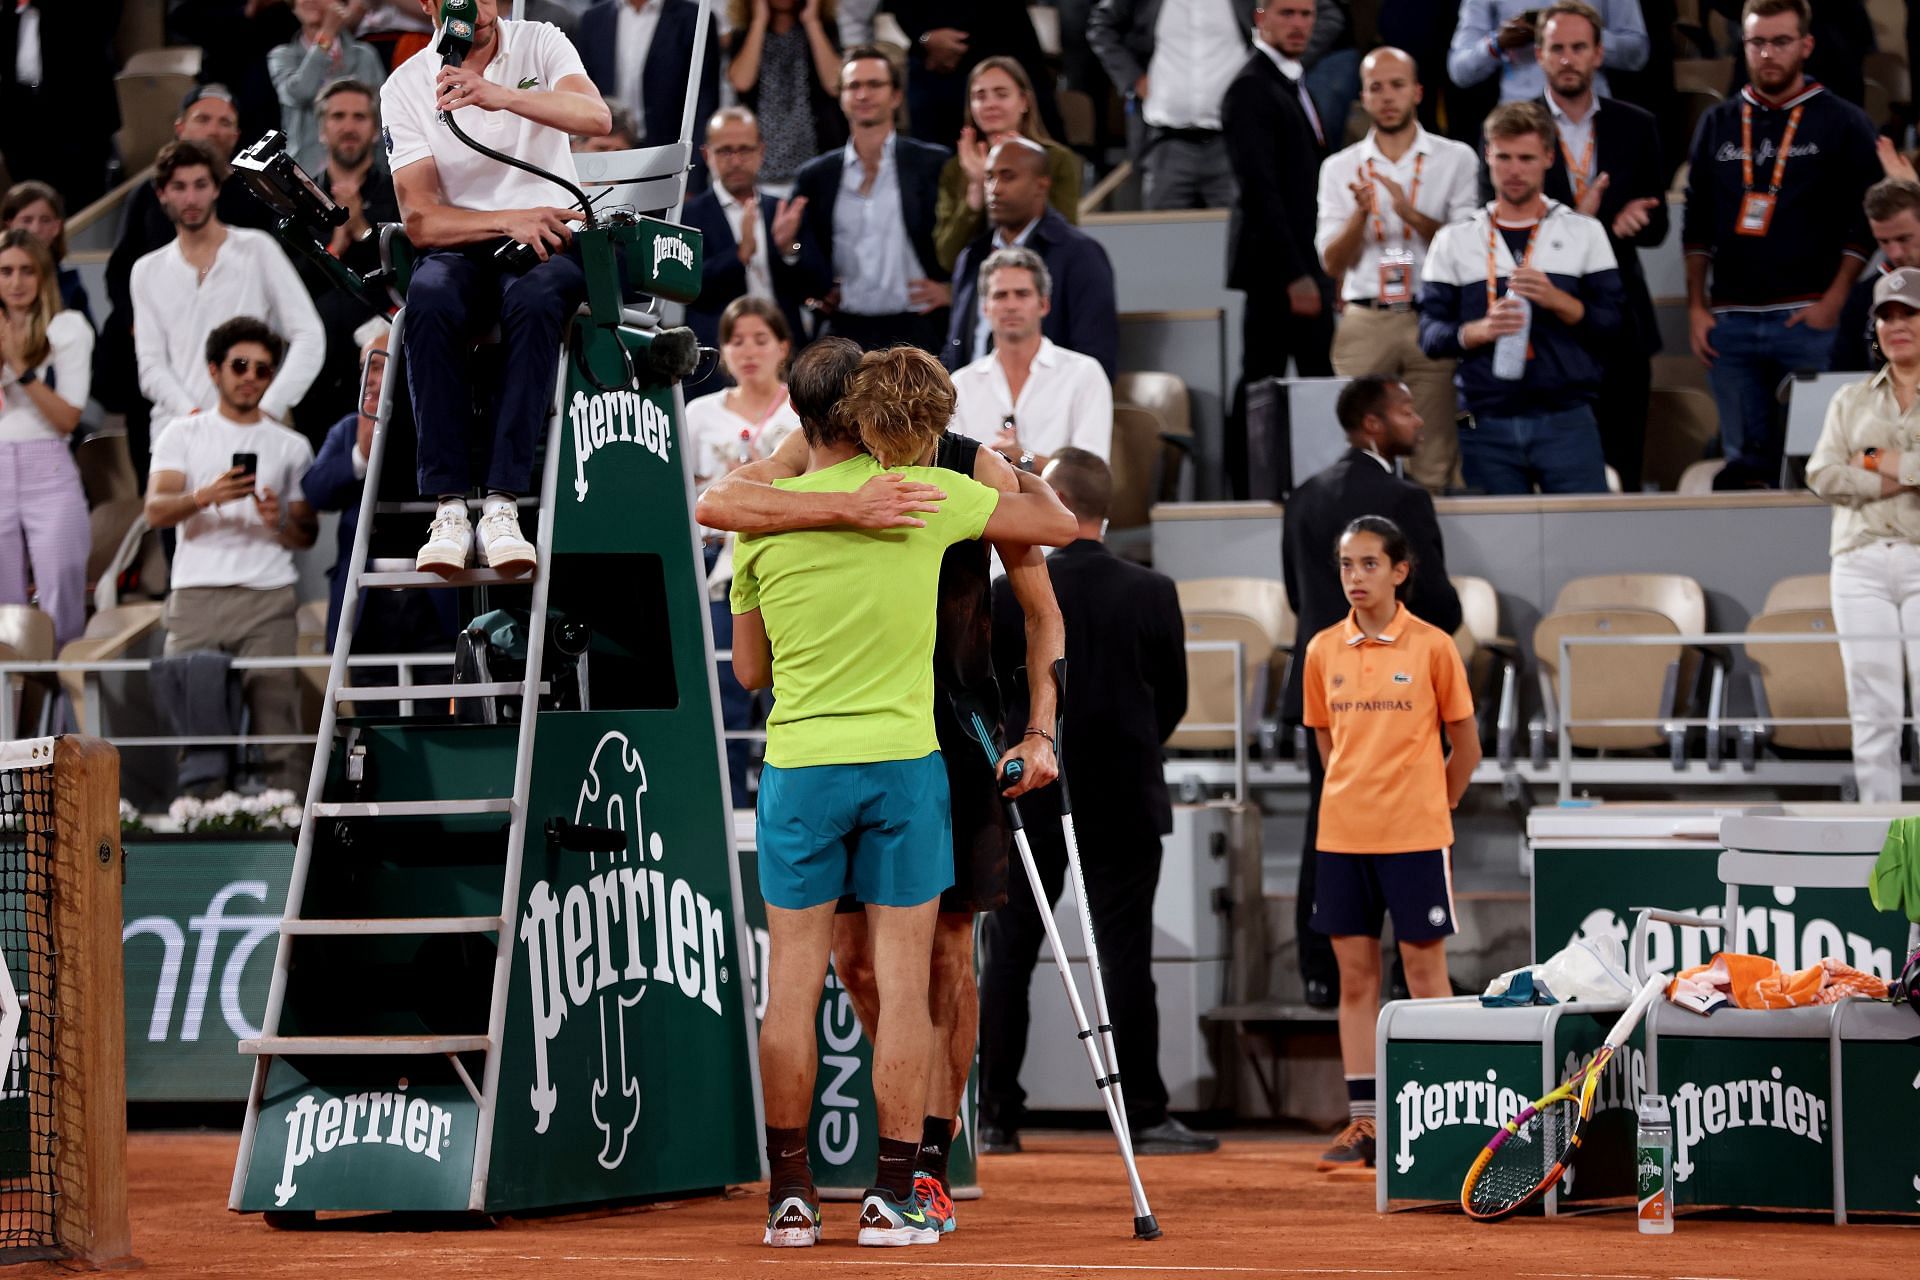 Zverev embraces Nadal following his retirement at the 2022 French Open.